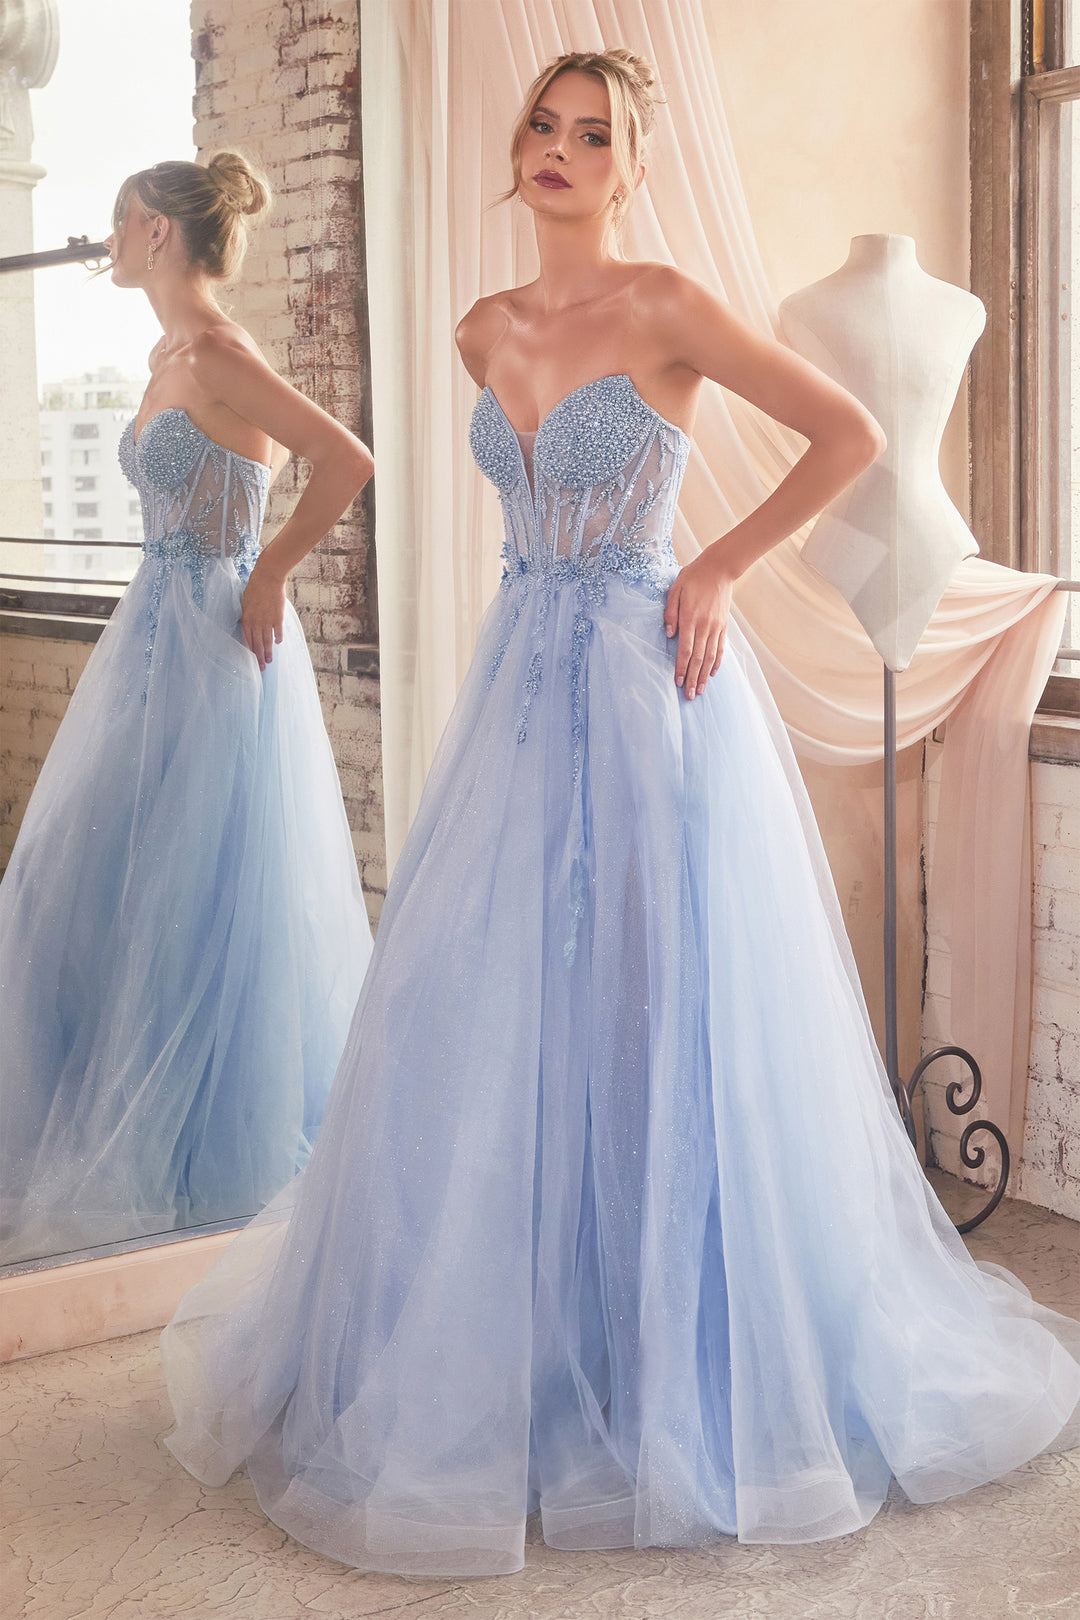 Beaded Strapless Tulle Slit Gown by Ladivine CD0230